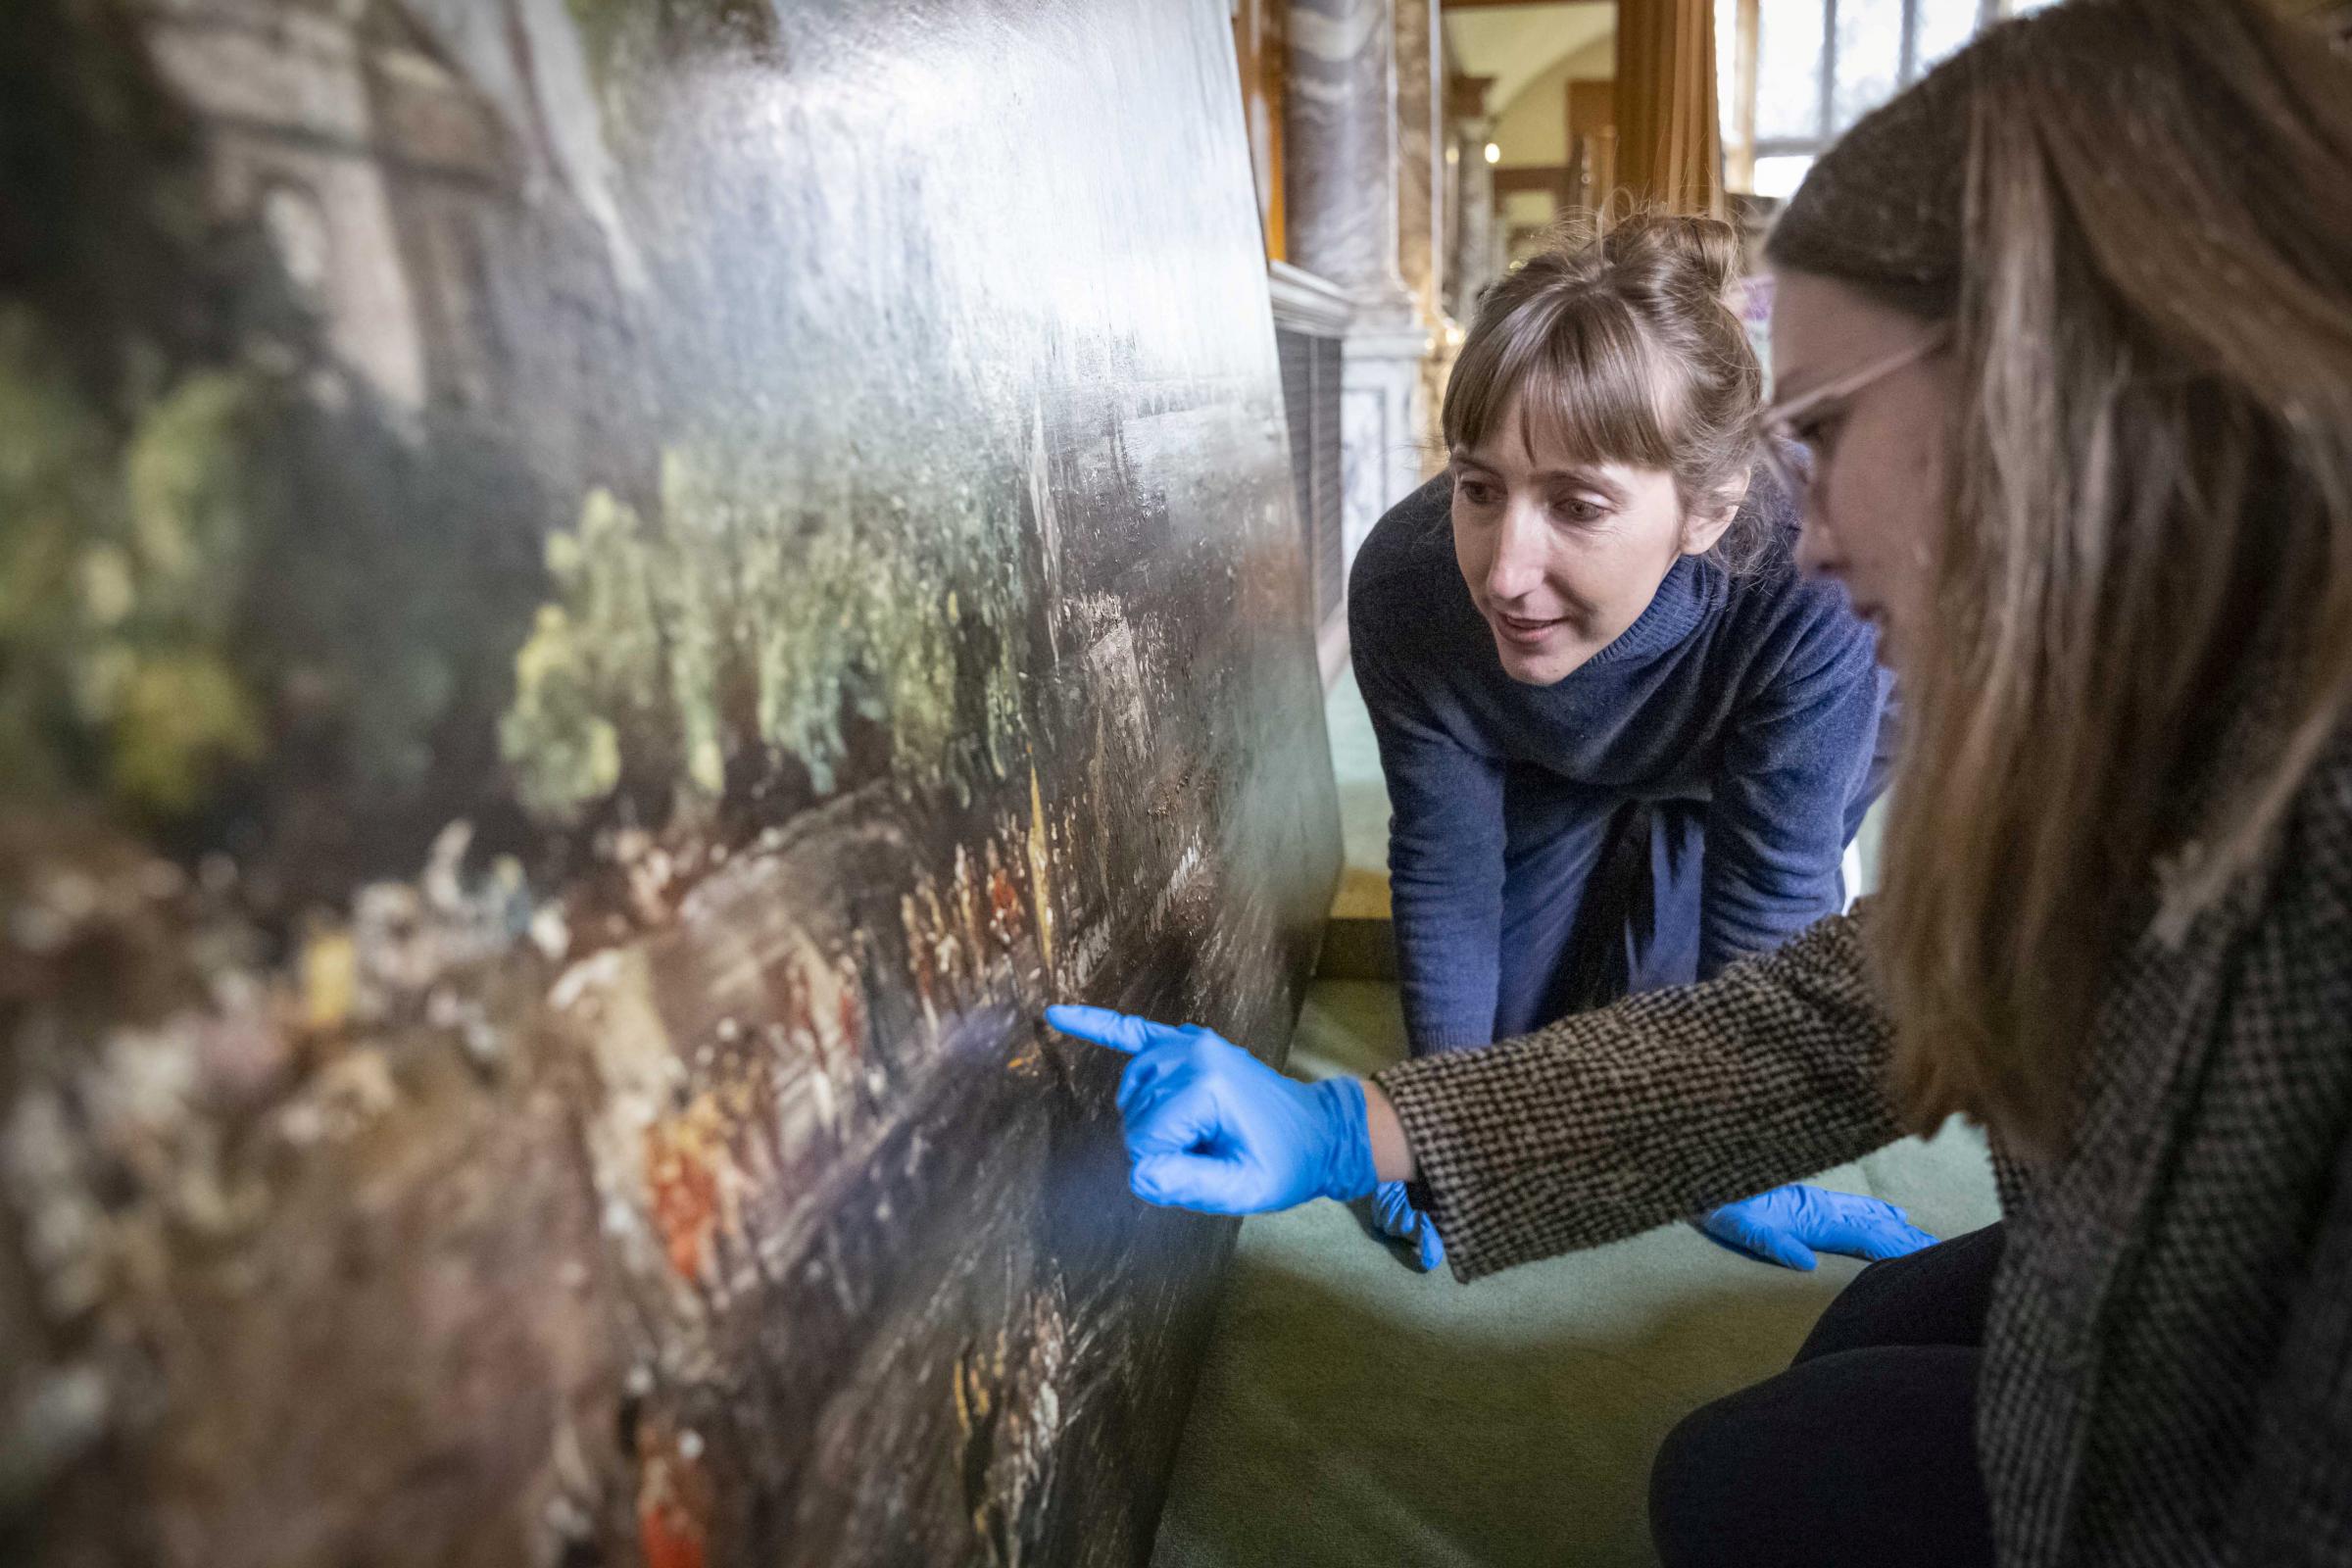 Details - curators at the National Trust examine the largest known painting by John Constable. Picture: National Trust/James Dobson